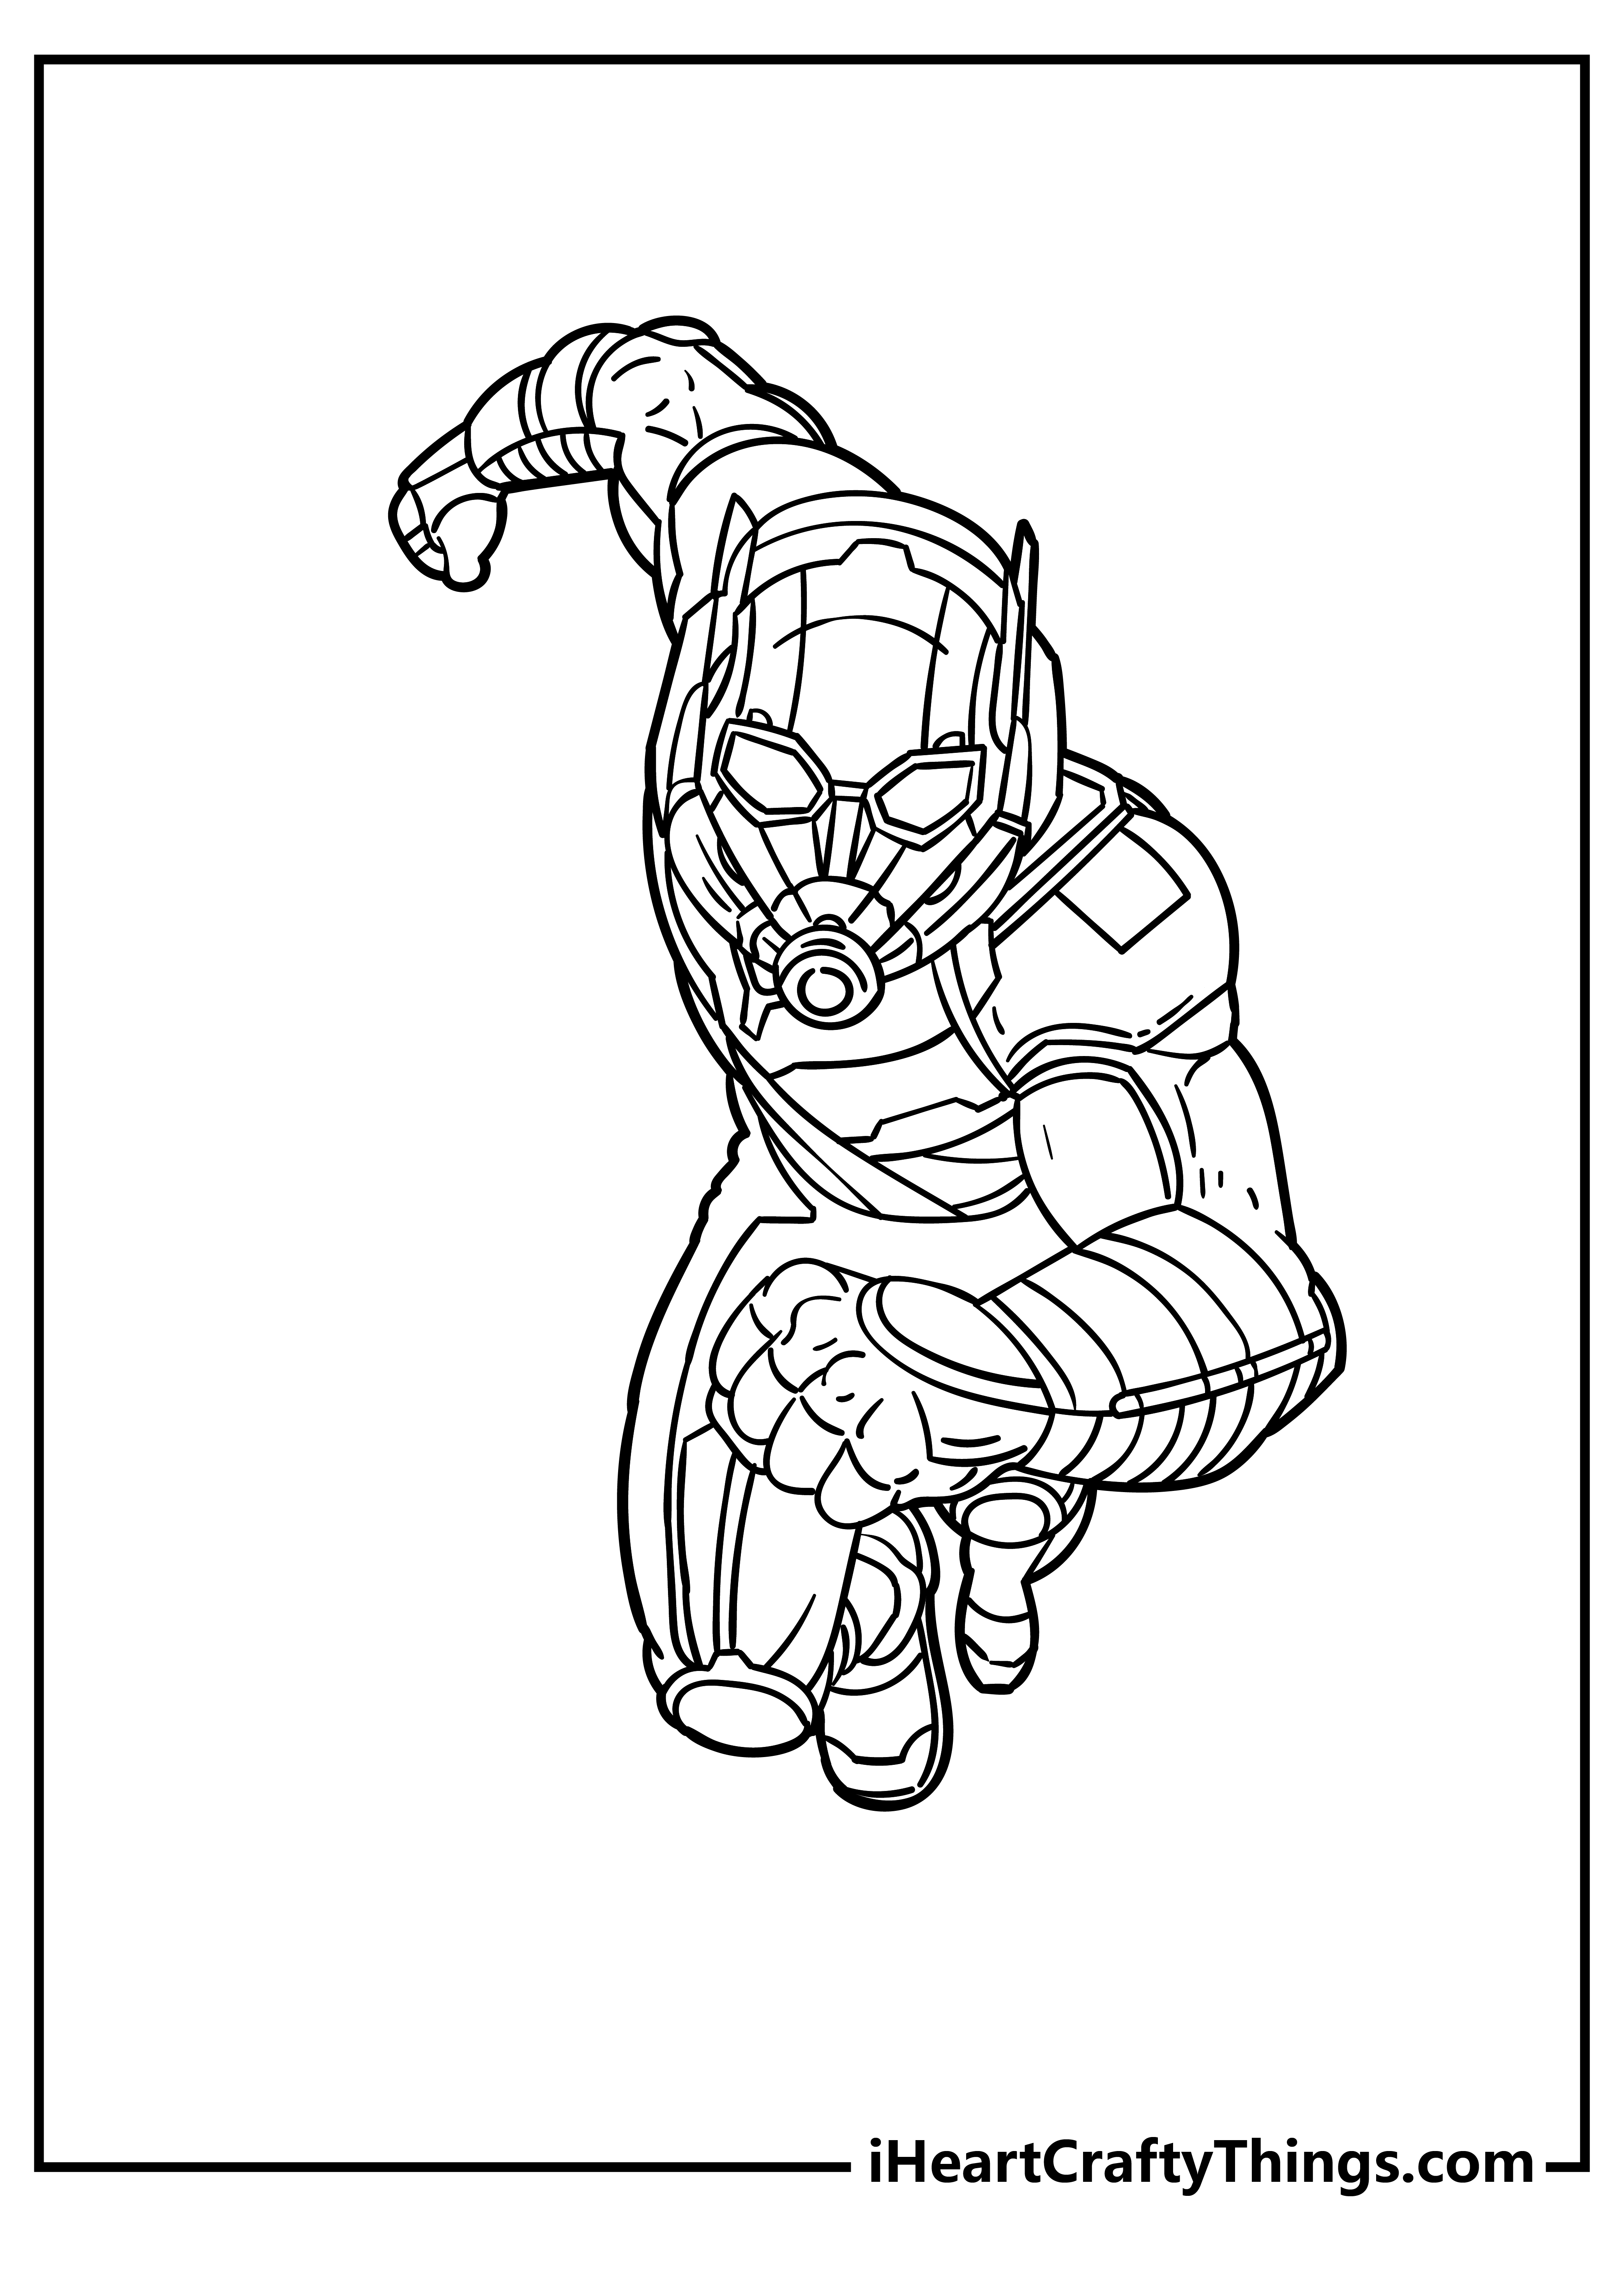 Printable Avengers Coloring Pages Updated 18